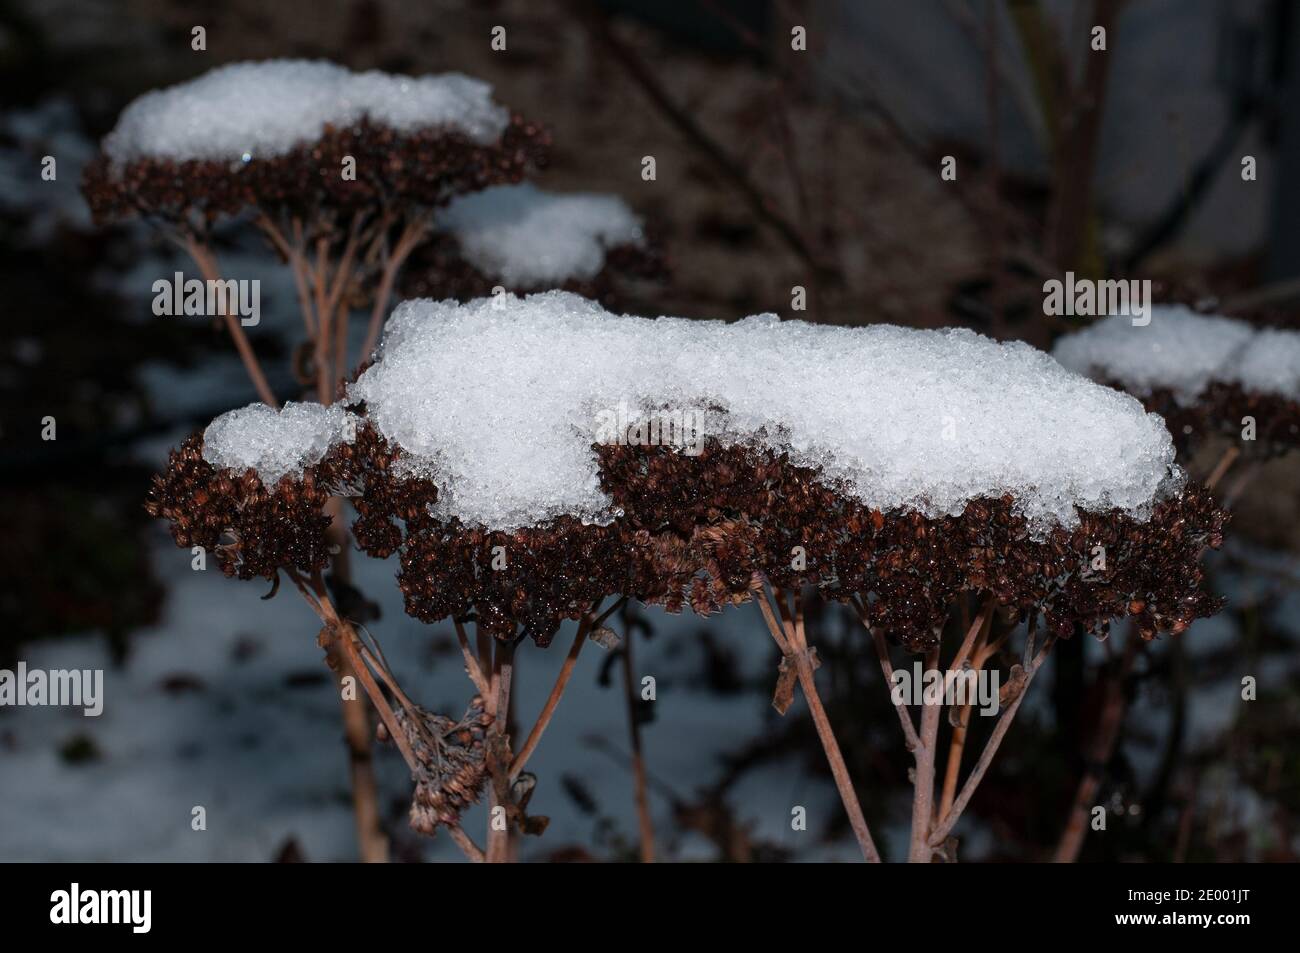 close-up of the wilted flower heads of sedum plants in winter covered with snow Stock Photo